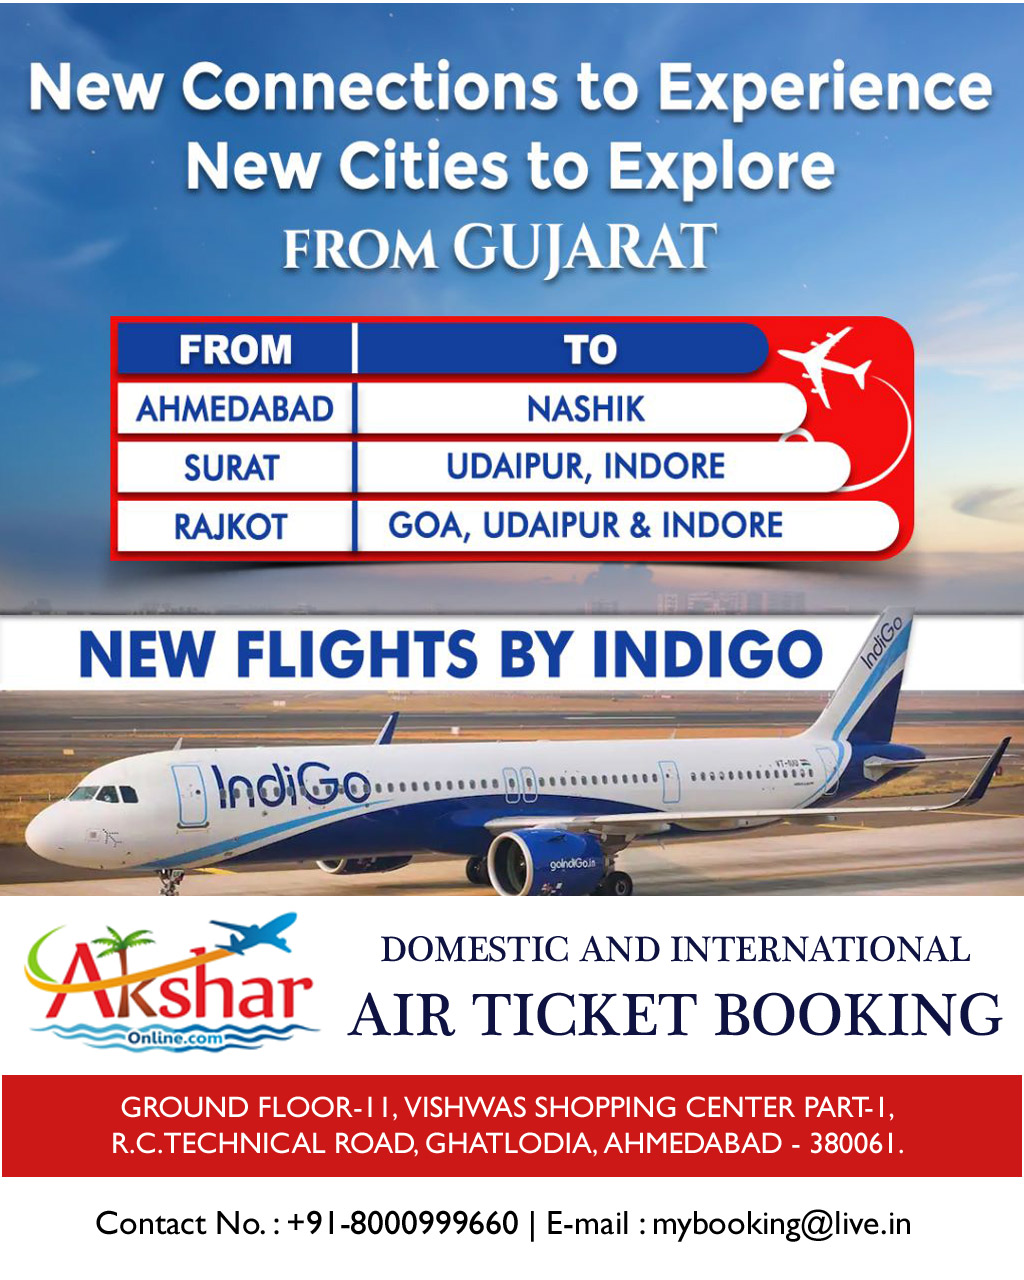 new connections to experience new cities to explore from gujarat, from ahmedabad to nashik, nashik to ahmedabad, surat to udaipur, udaipur to surat, surat to indore, indore to surat, rajkot to goa, goa to rajkot, rajkot to udaipur, udaipur to rajkot, rajkot to indore, indore to rajkot. Best Rates domestic and international air ticket booking, call us on 8000999660, 9427703236. E-mail : mybooking@live.in, info.akshar@gmail.com